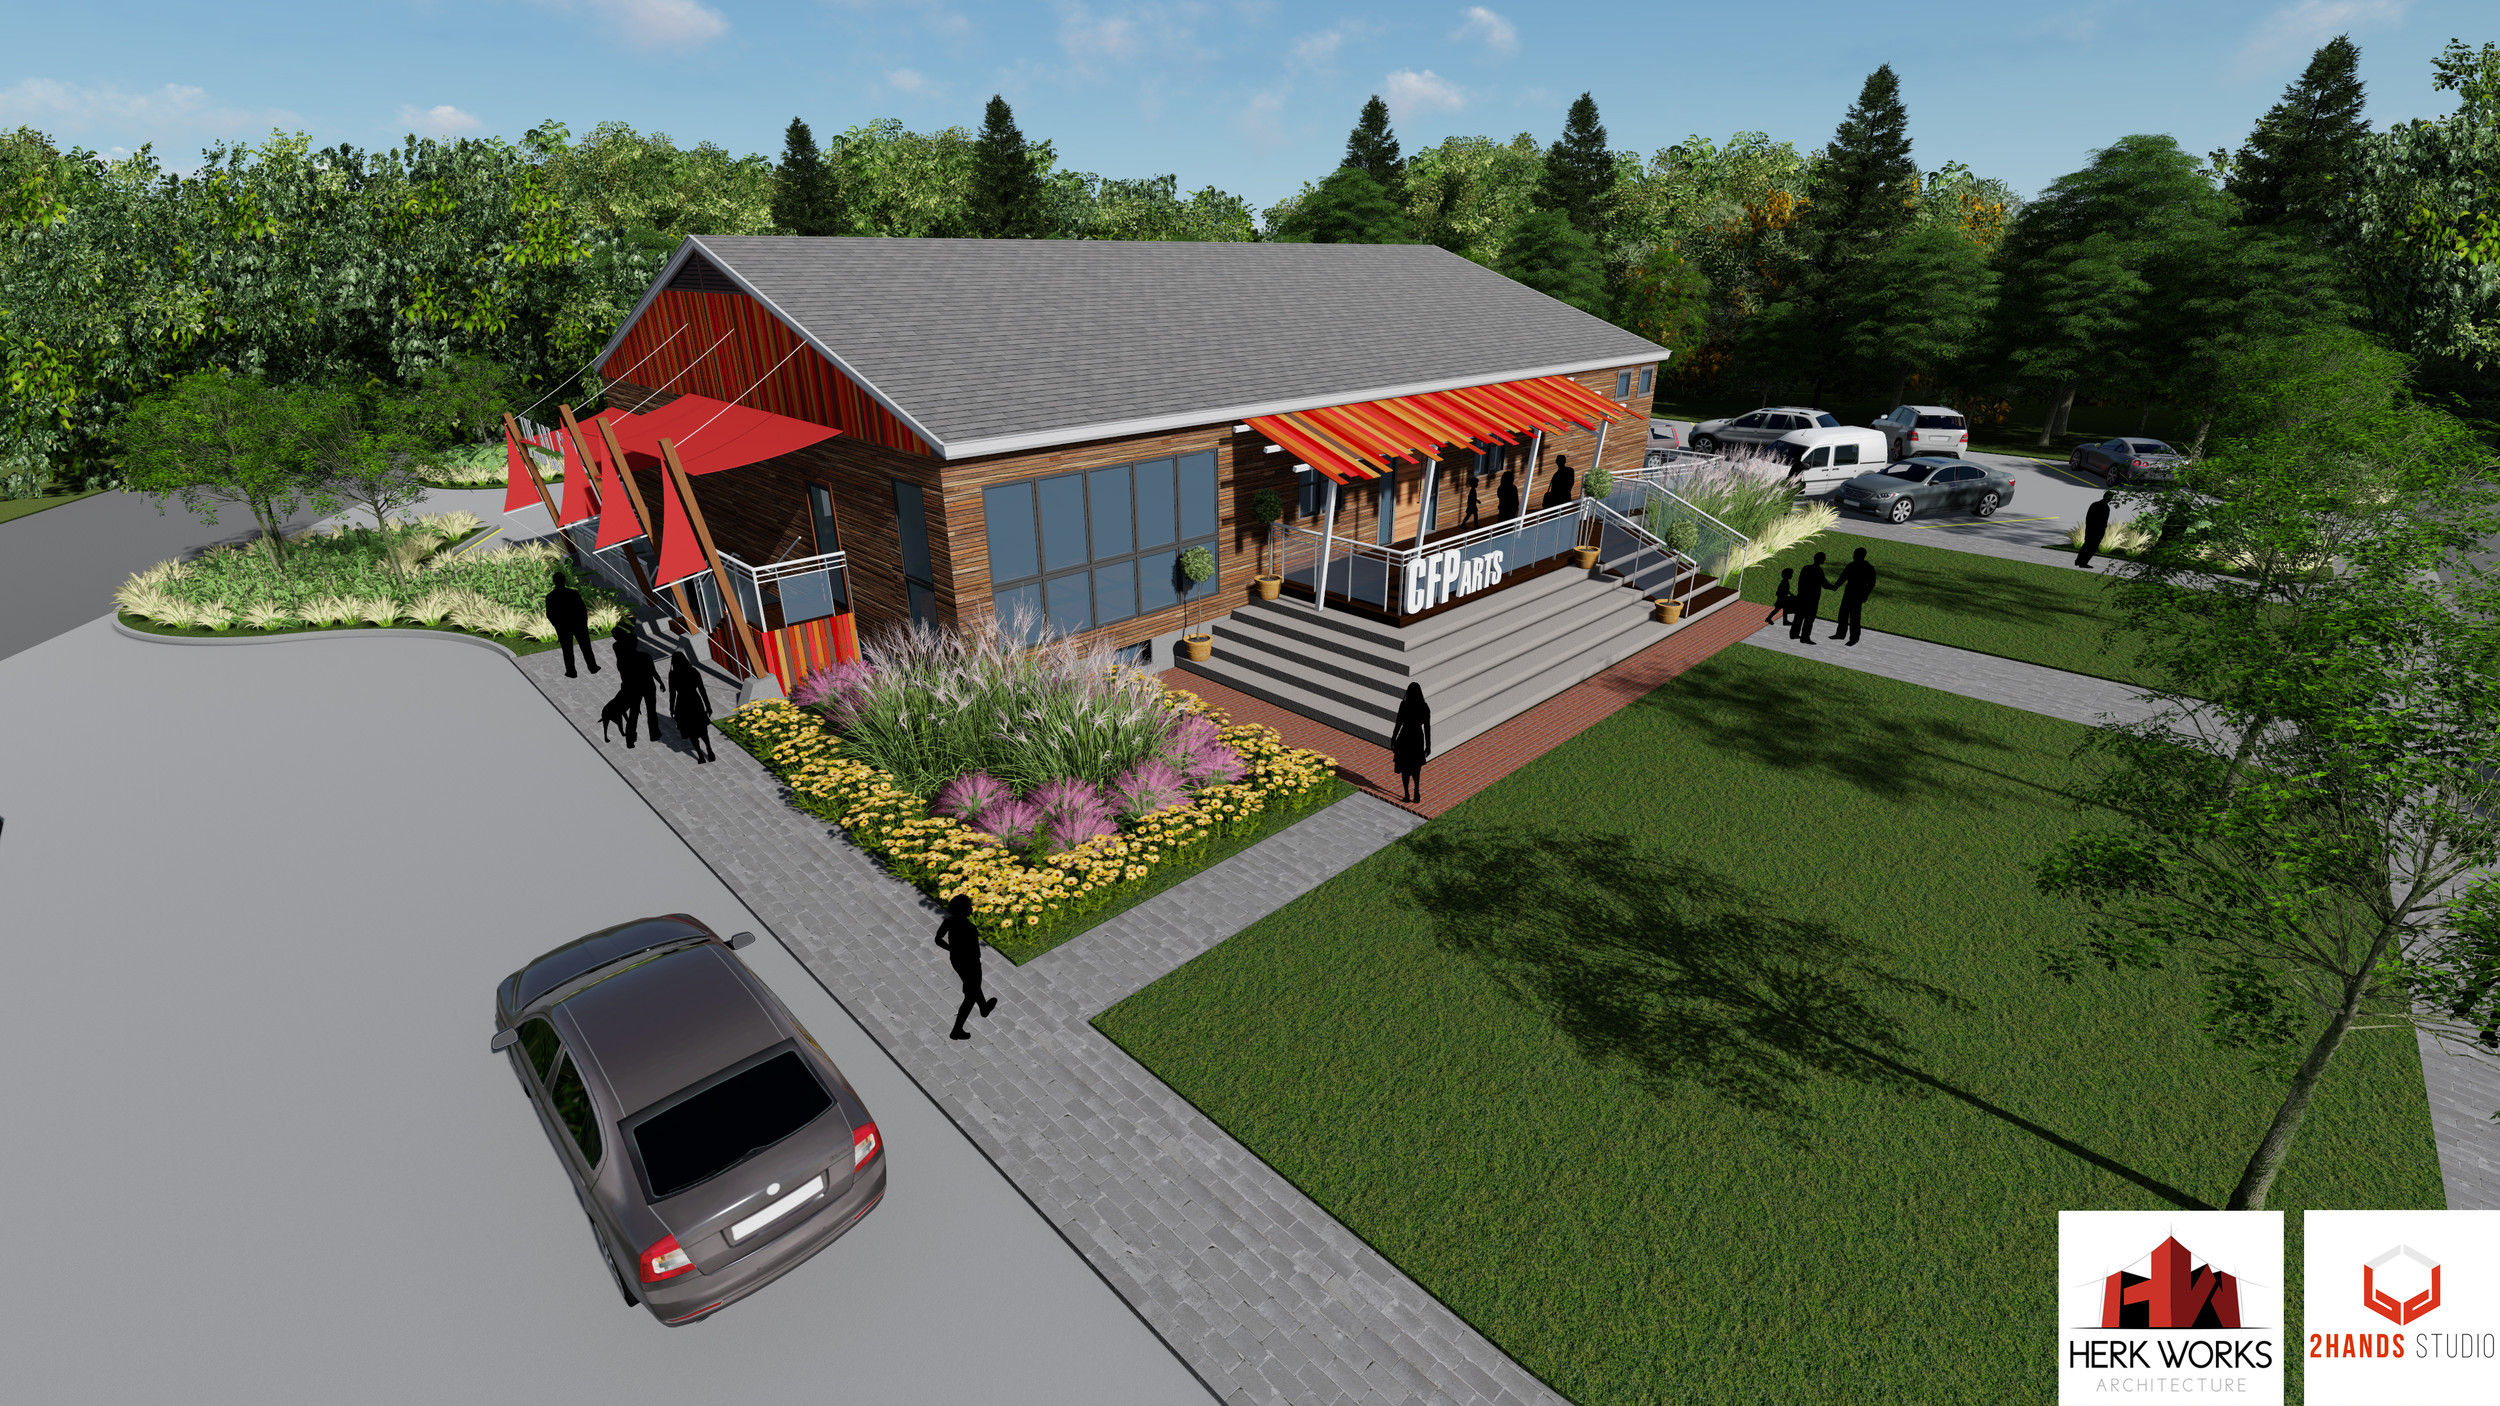 A rendering of what the Common Fence Point Community Hall may look like when renovations are completed, thanks to a recent $187,000 grant the association that owns the building recently received.